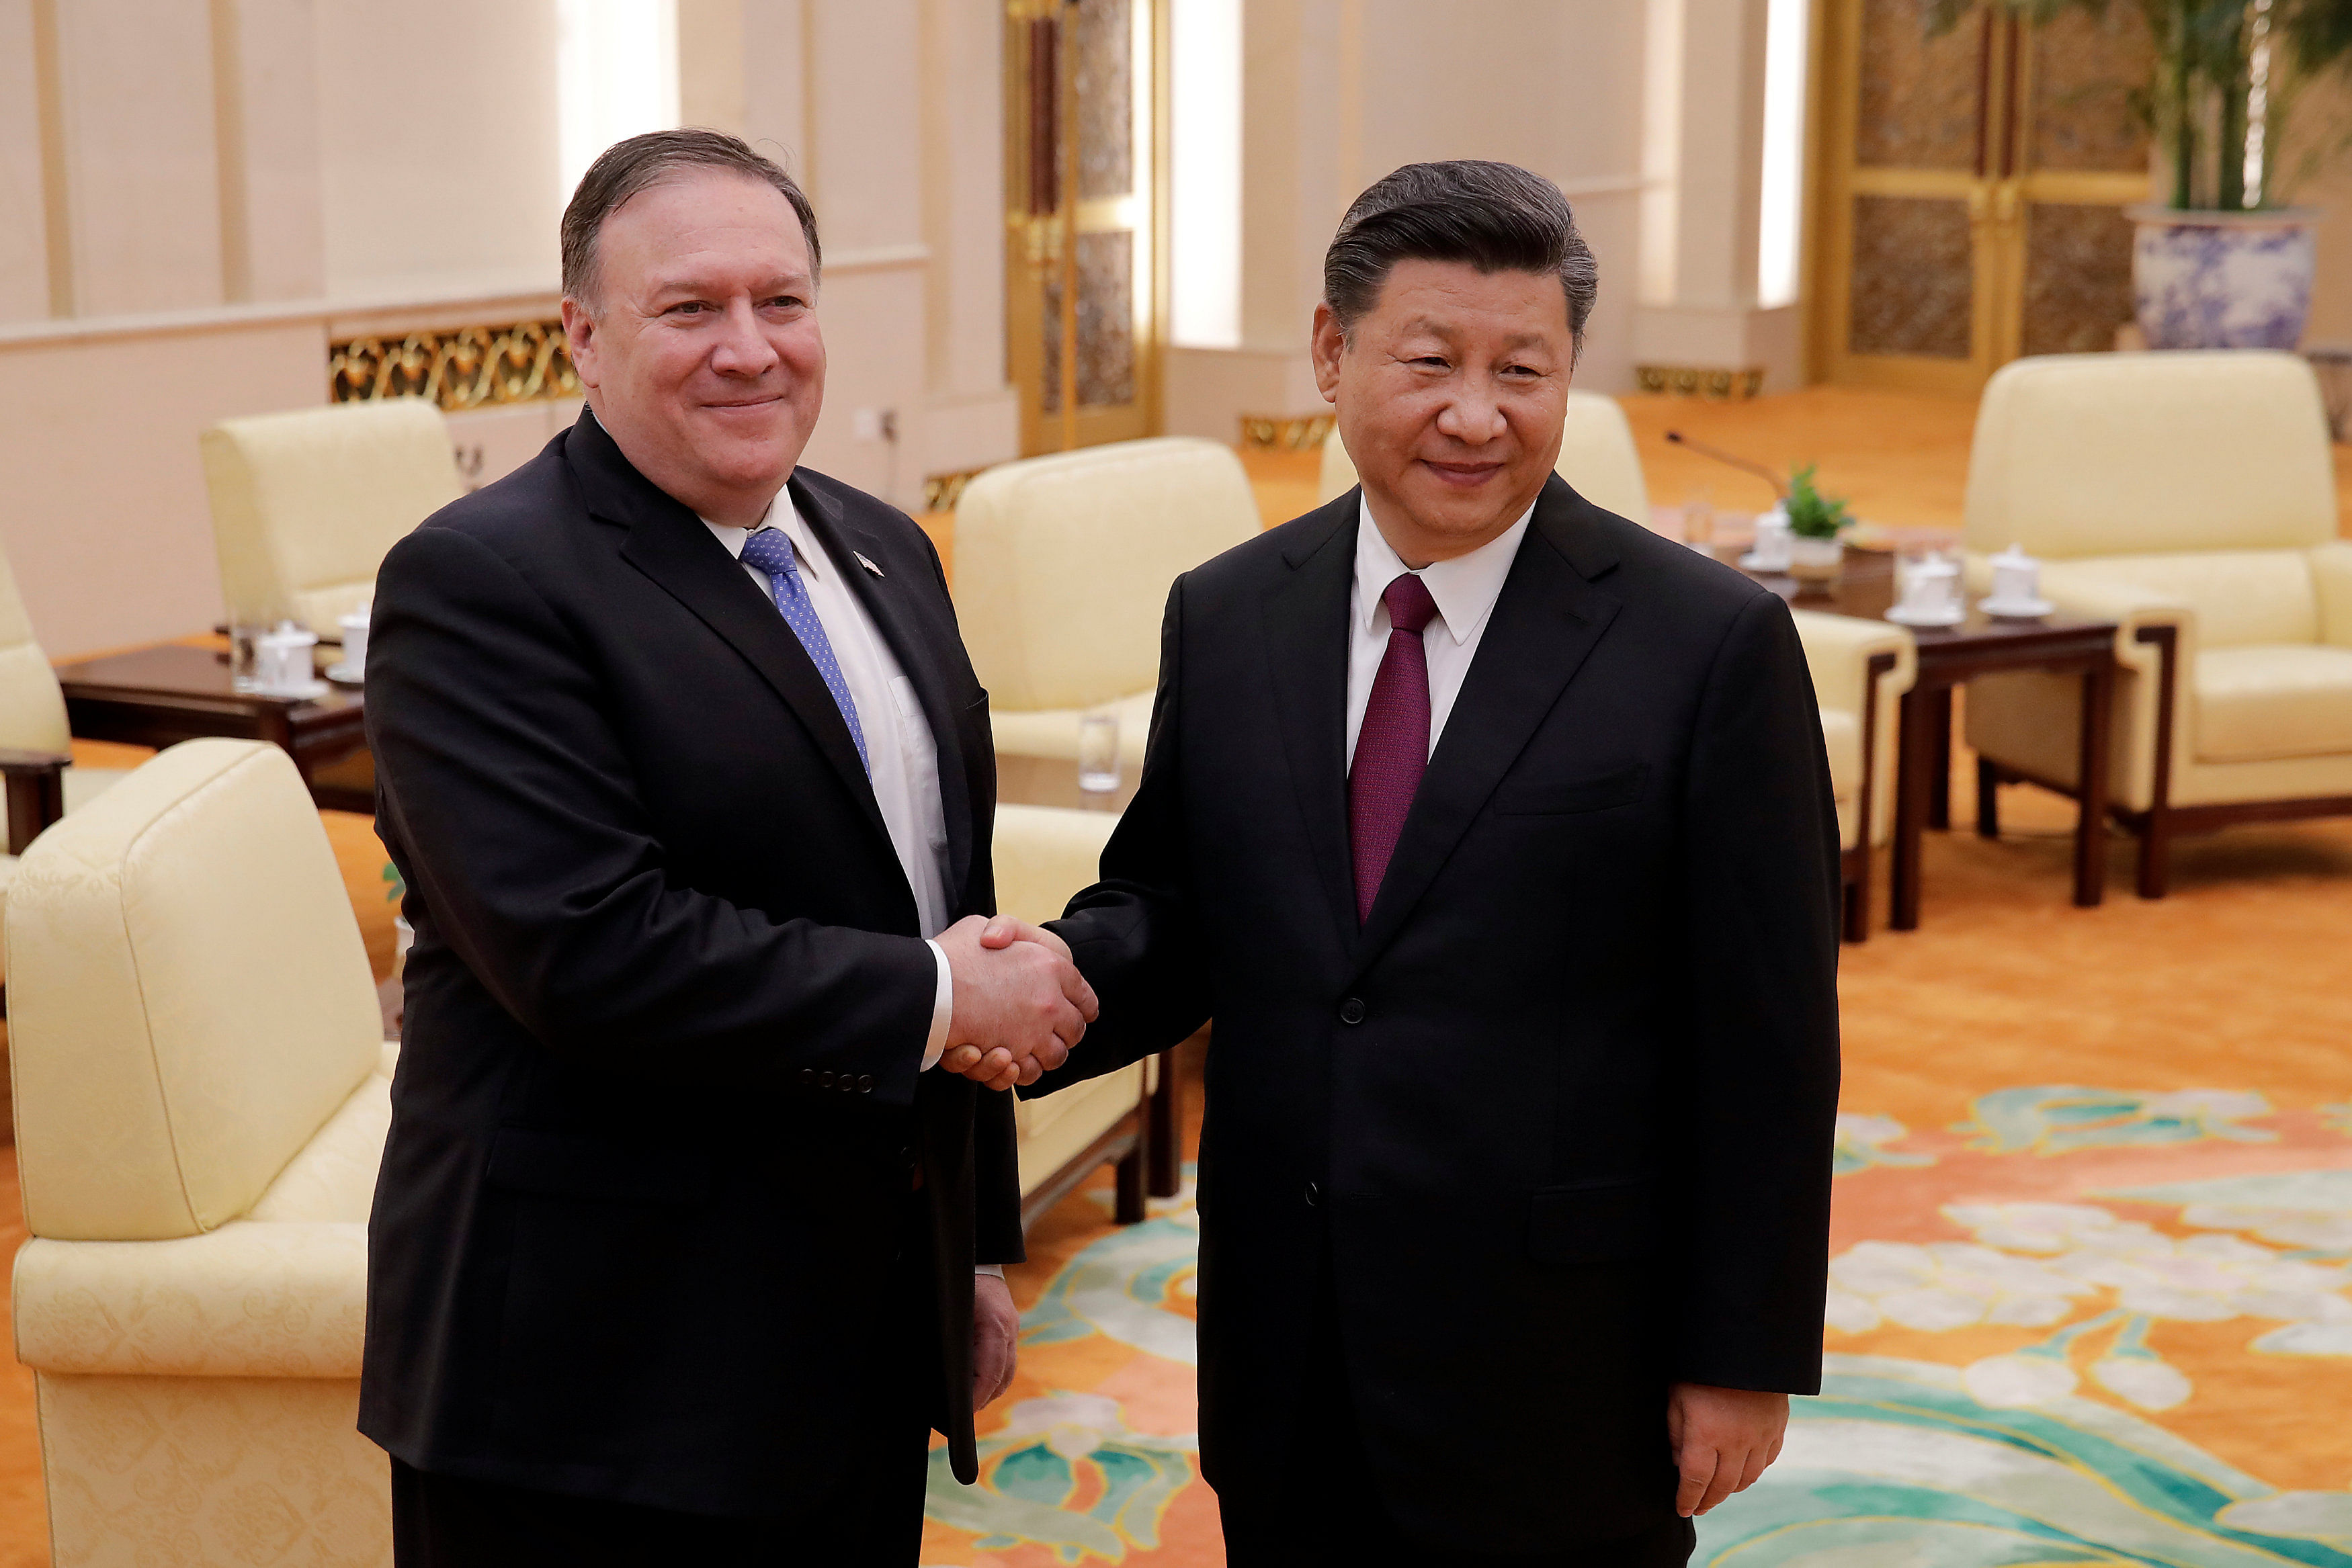 Pompeo raised eyebrows among students of social media tea leaves when he posted a picture of his dog looking ready to tear into a toy Winnie the Pooh. Credit: Reuters File Photo